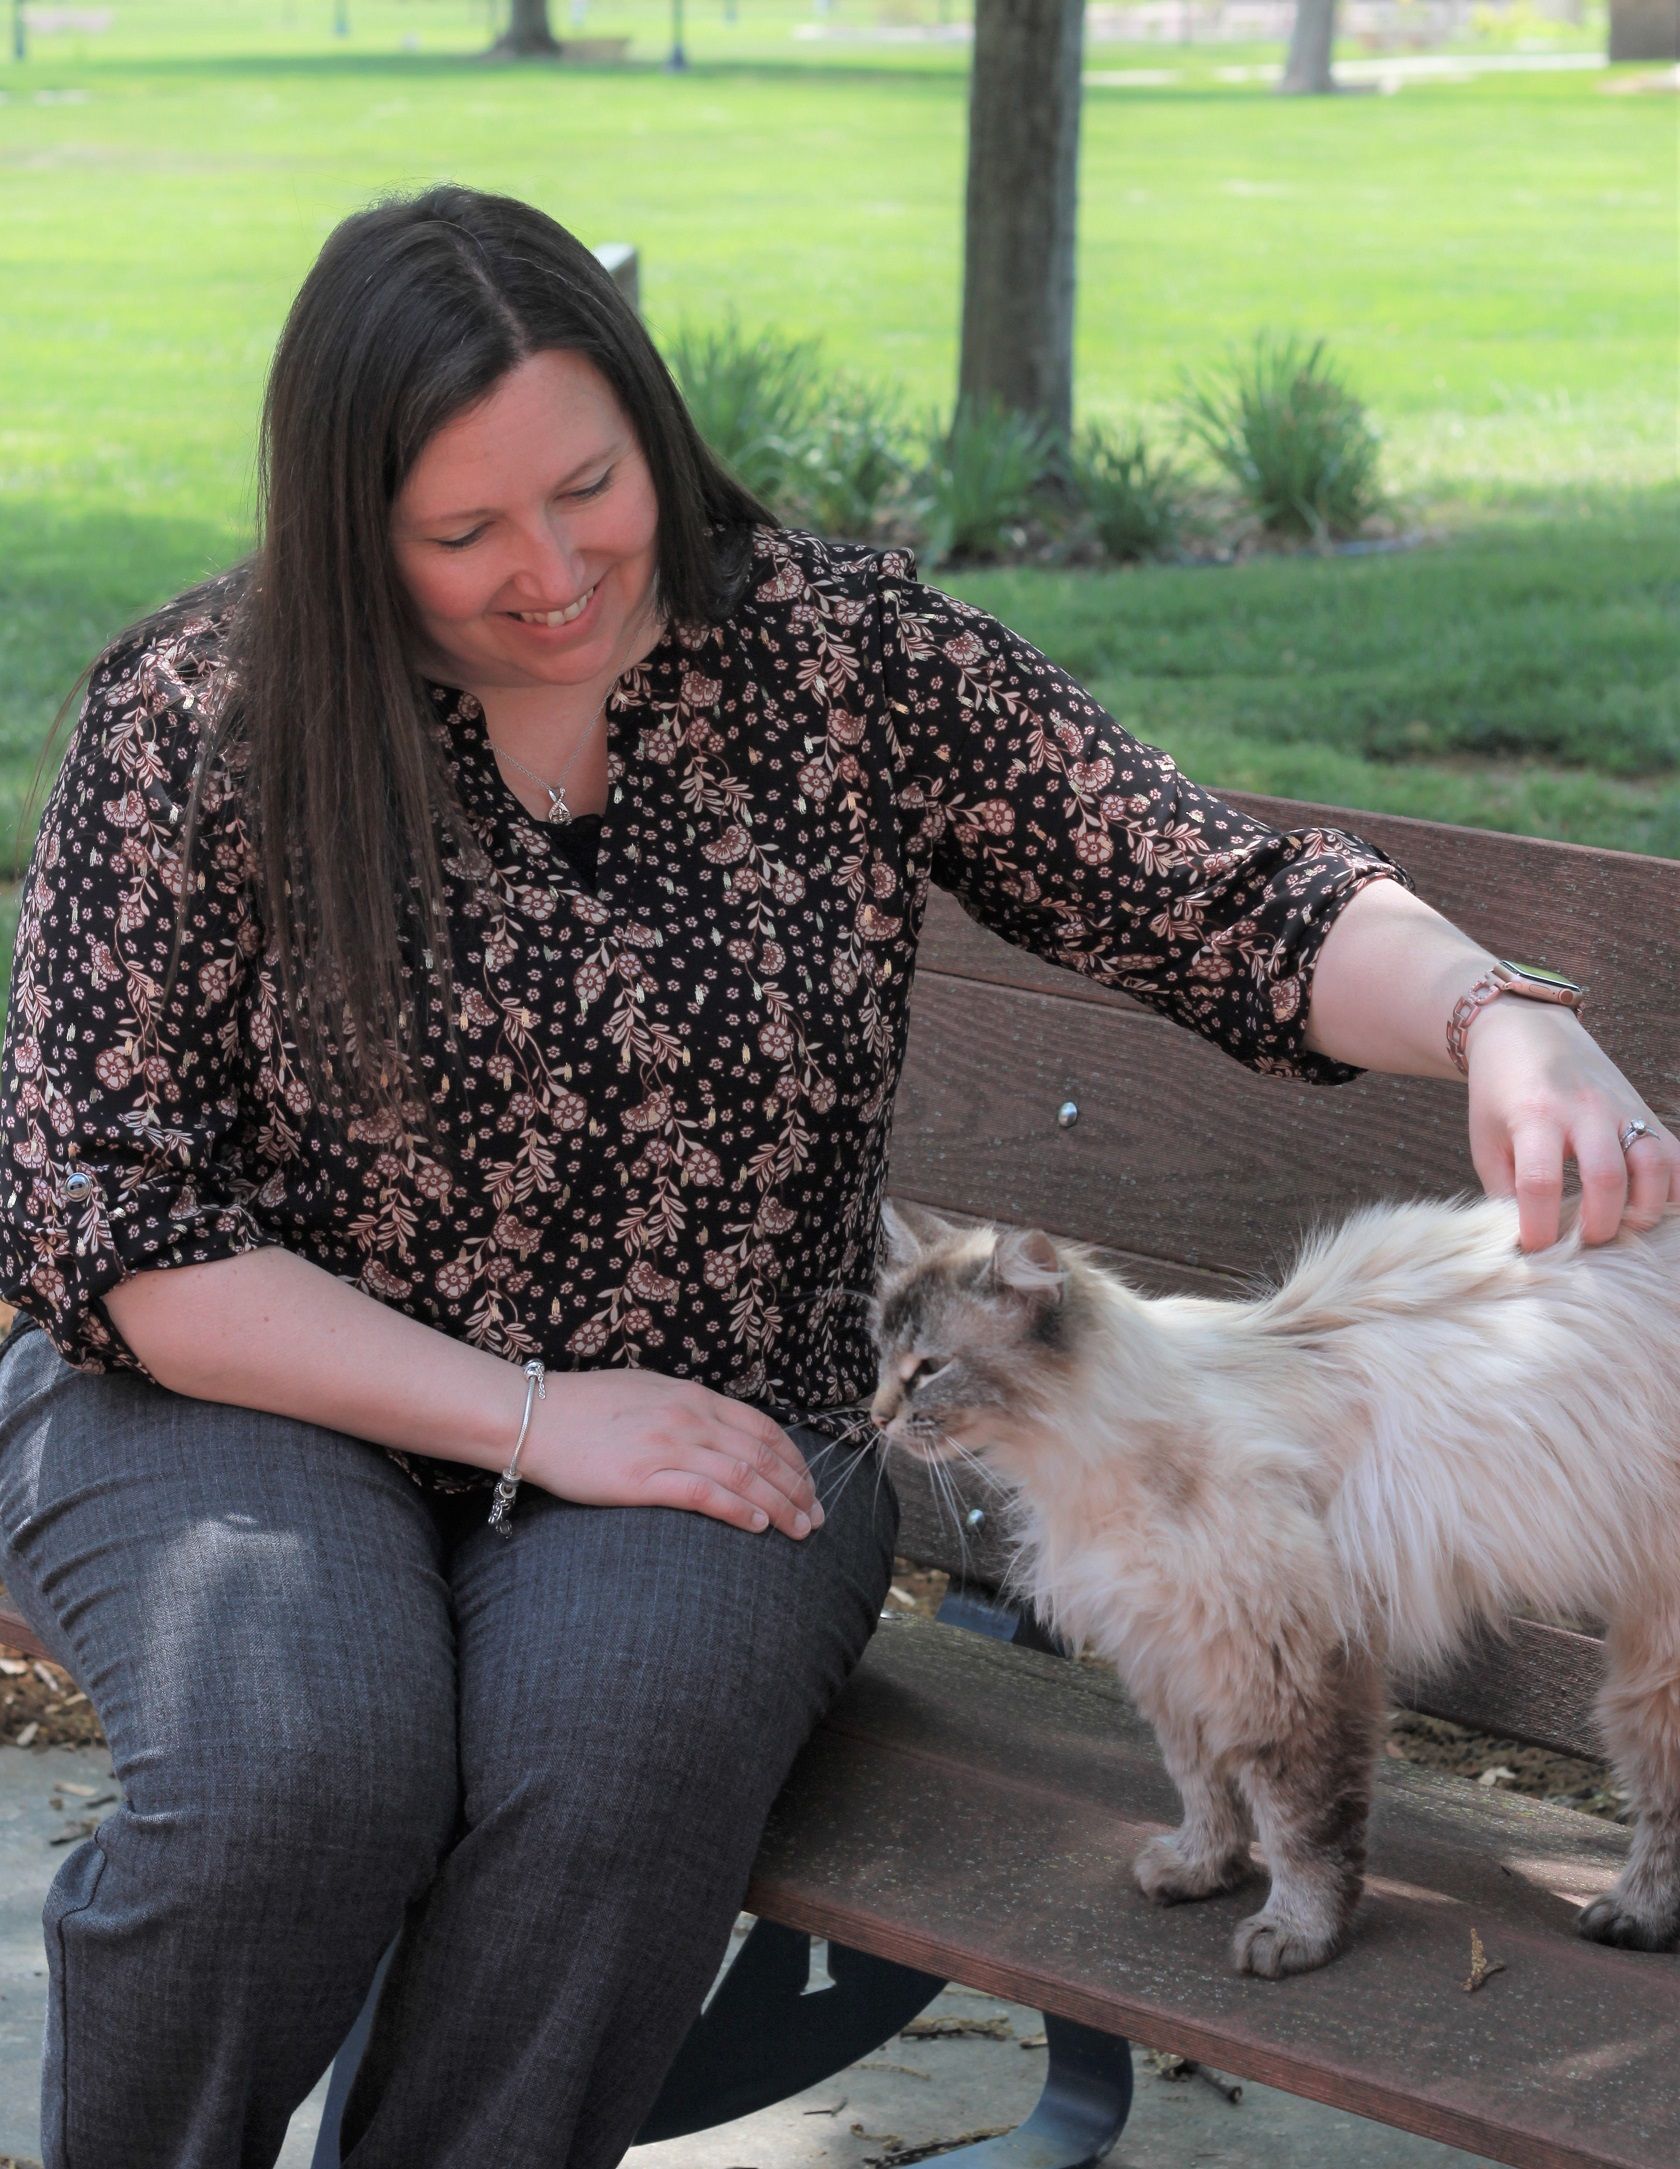 A community of cat lovers takes care of NU's campus cats